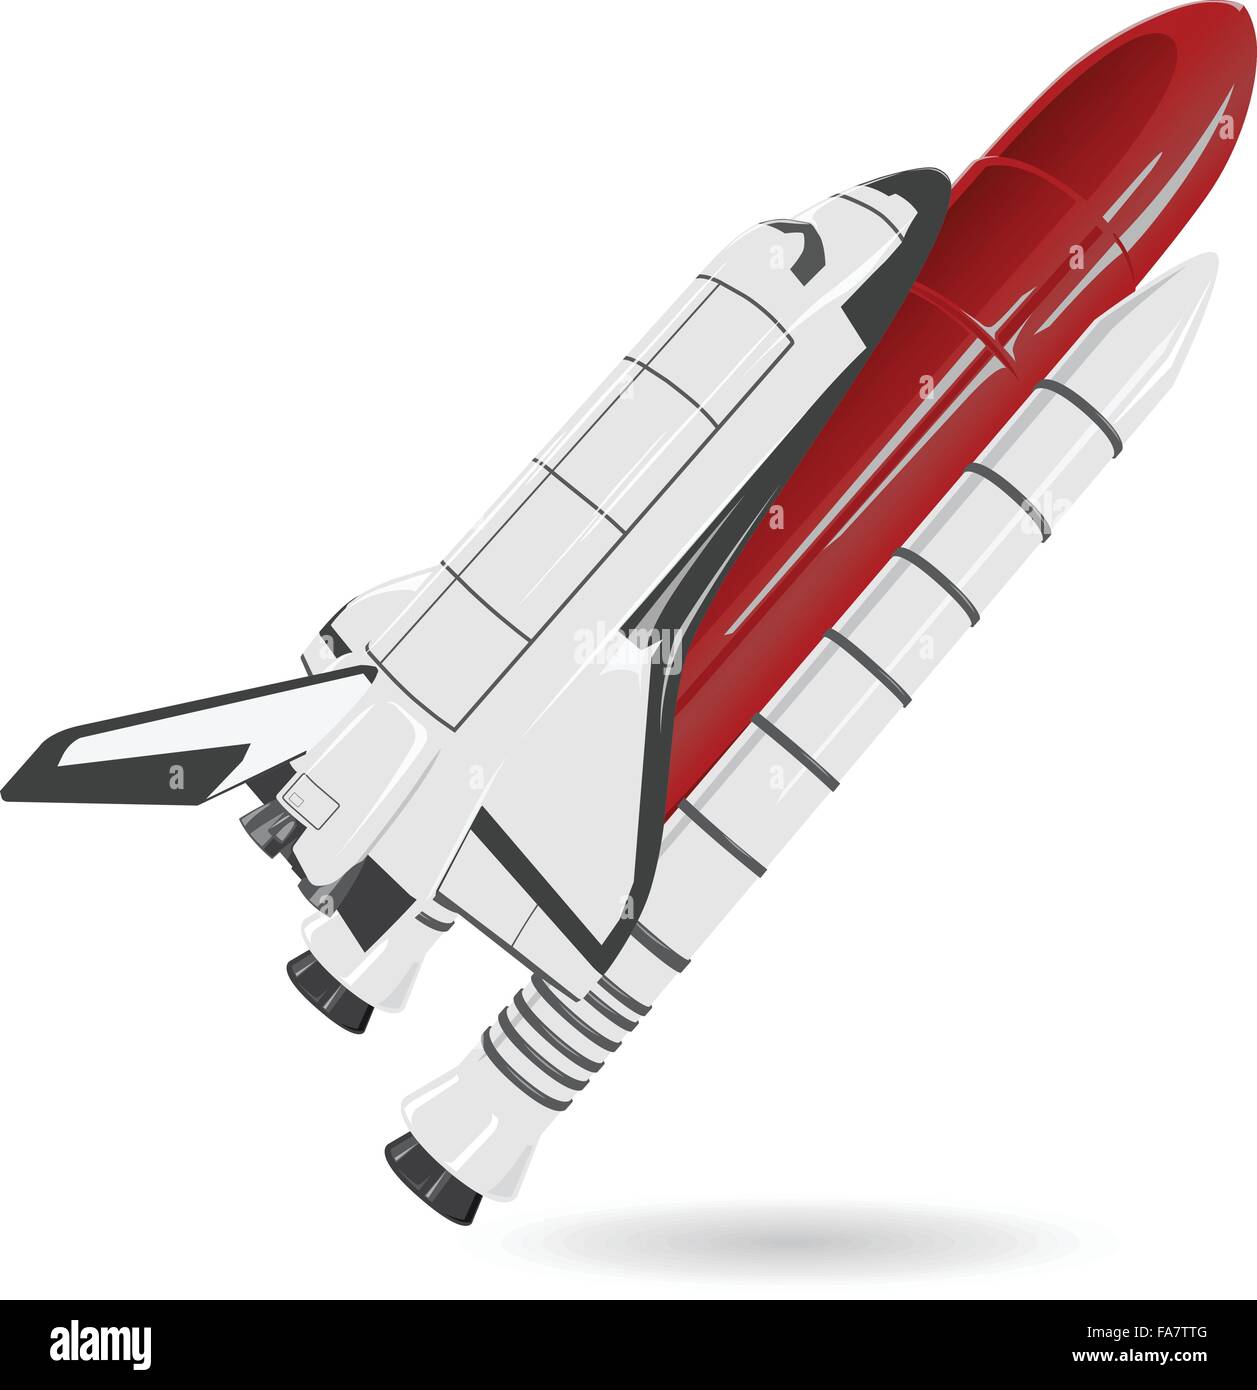 White and red nice space shuttle on white - nice flighting spaceship fuel tank - flatten isolated illustration master vector Stock Vector